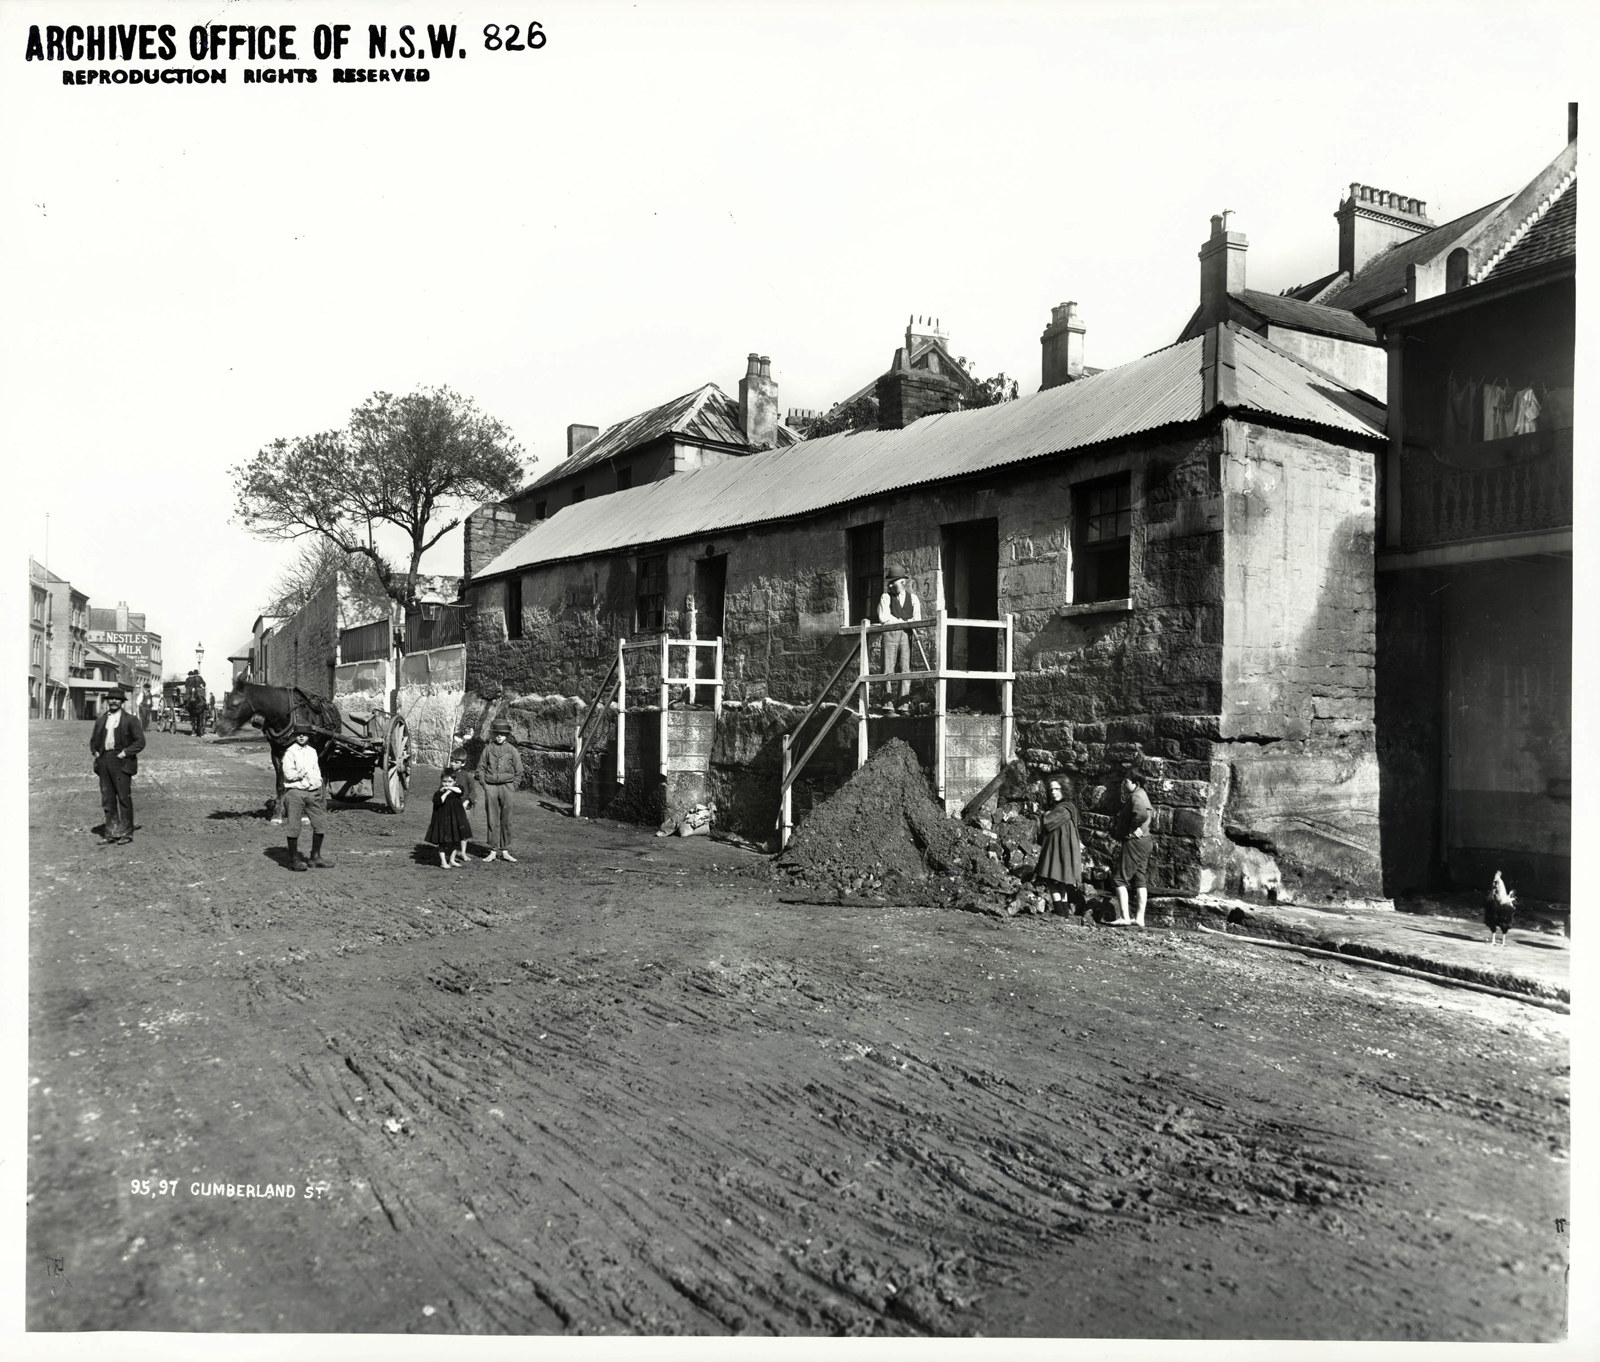 Photograph of a row of small cottages lining a dirt street. Children are shown standing on the street.